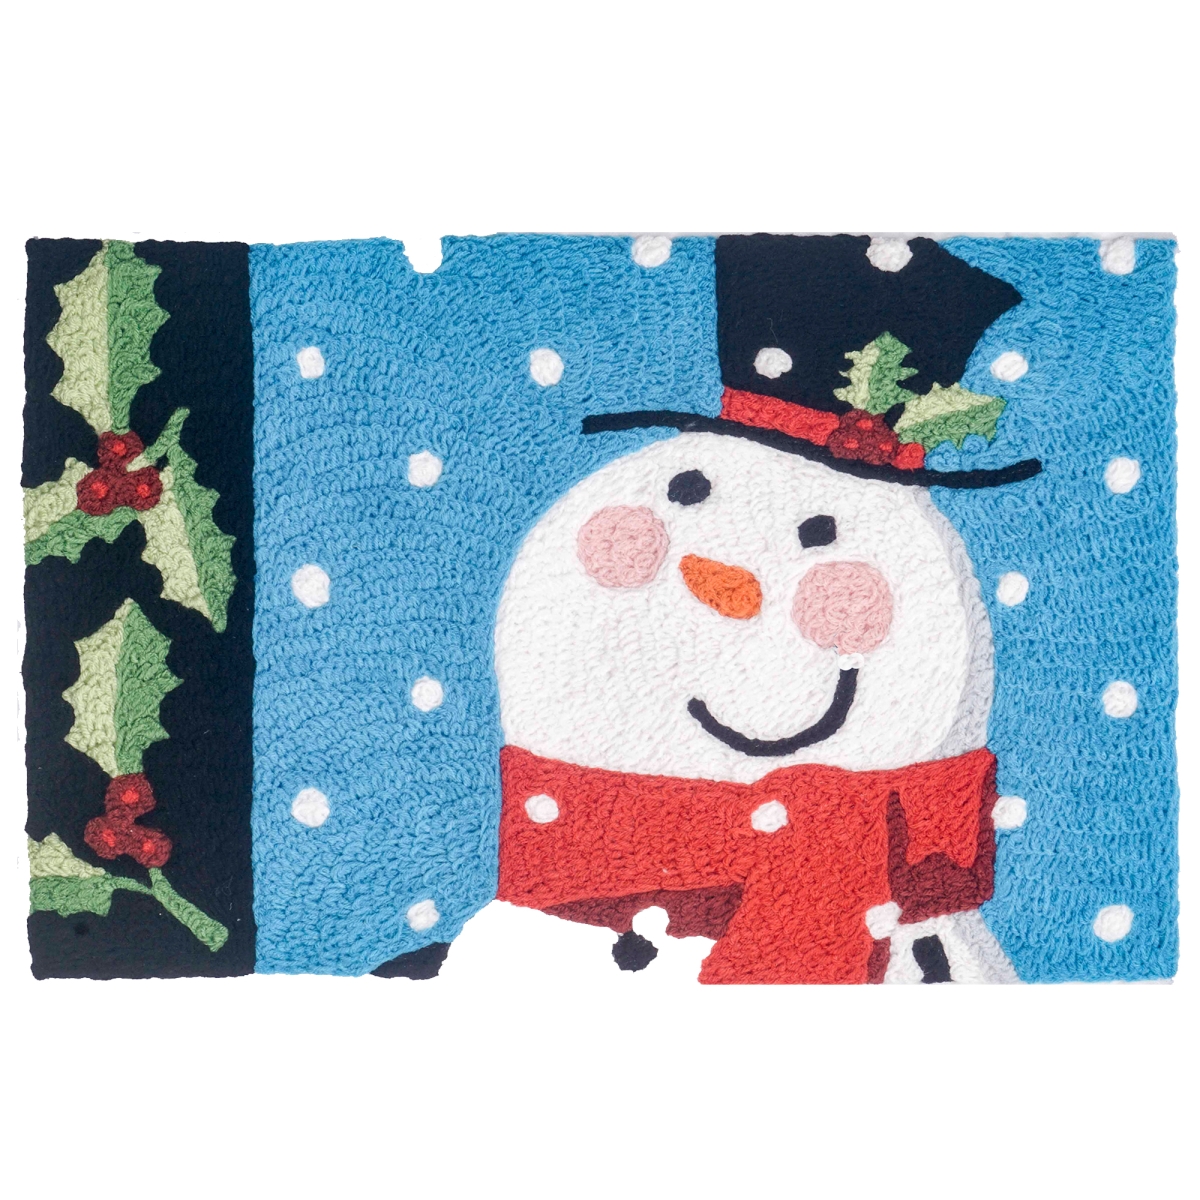 UPC 708793444529 product image for JBL-SFG054 20 x 30 in. Holly Jolly Snowman Indoor & Outdoor Accent Rug | upcitemdb.com